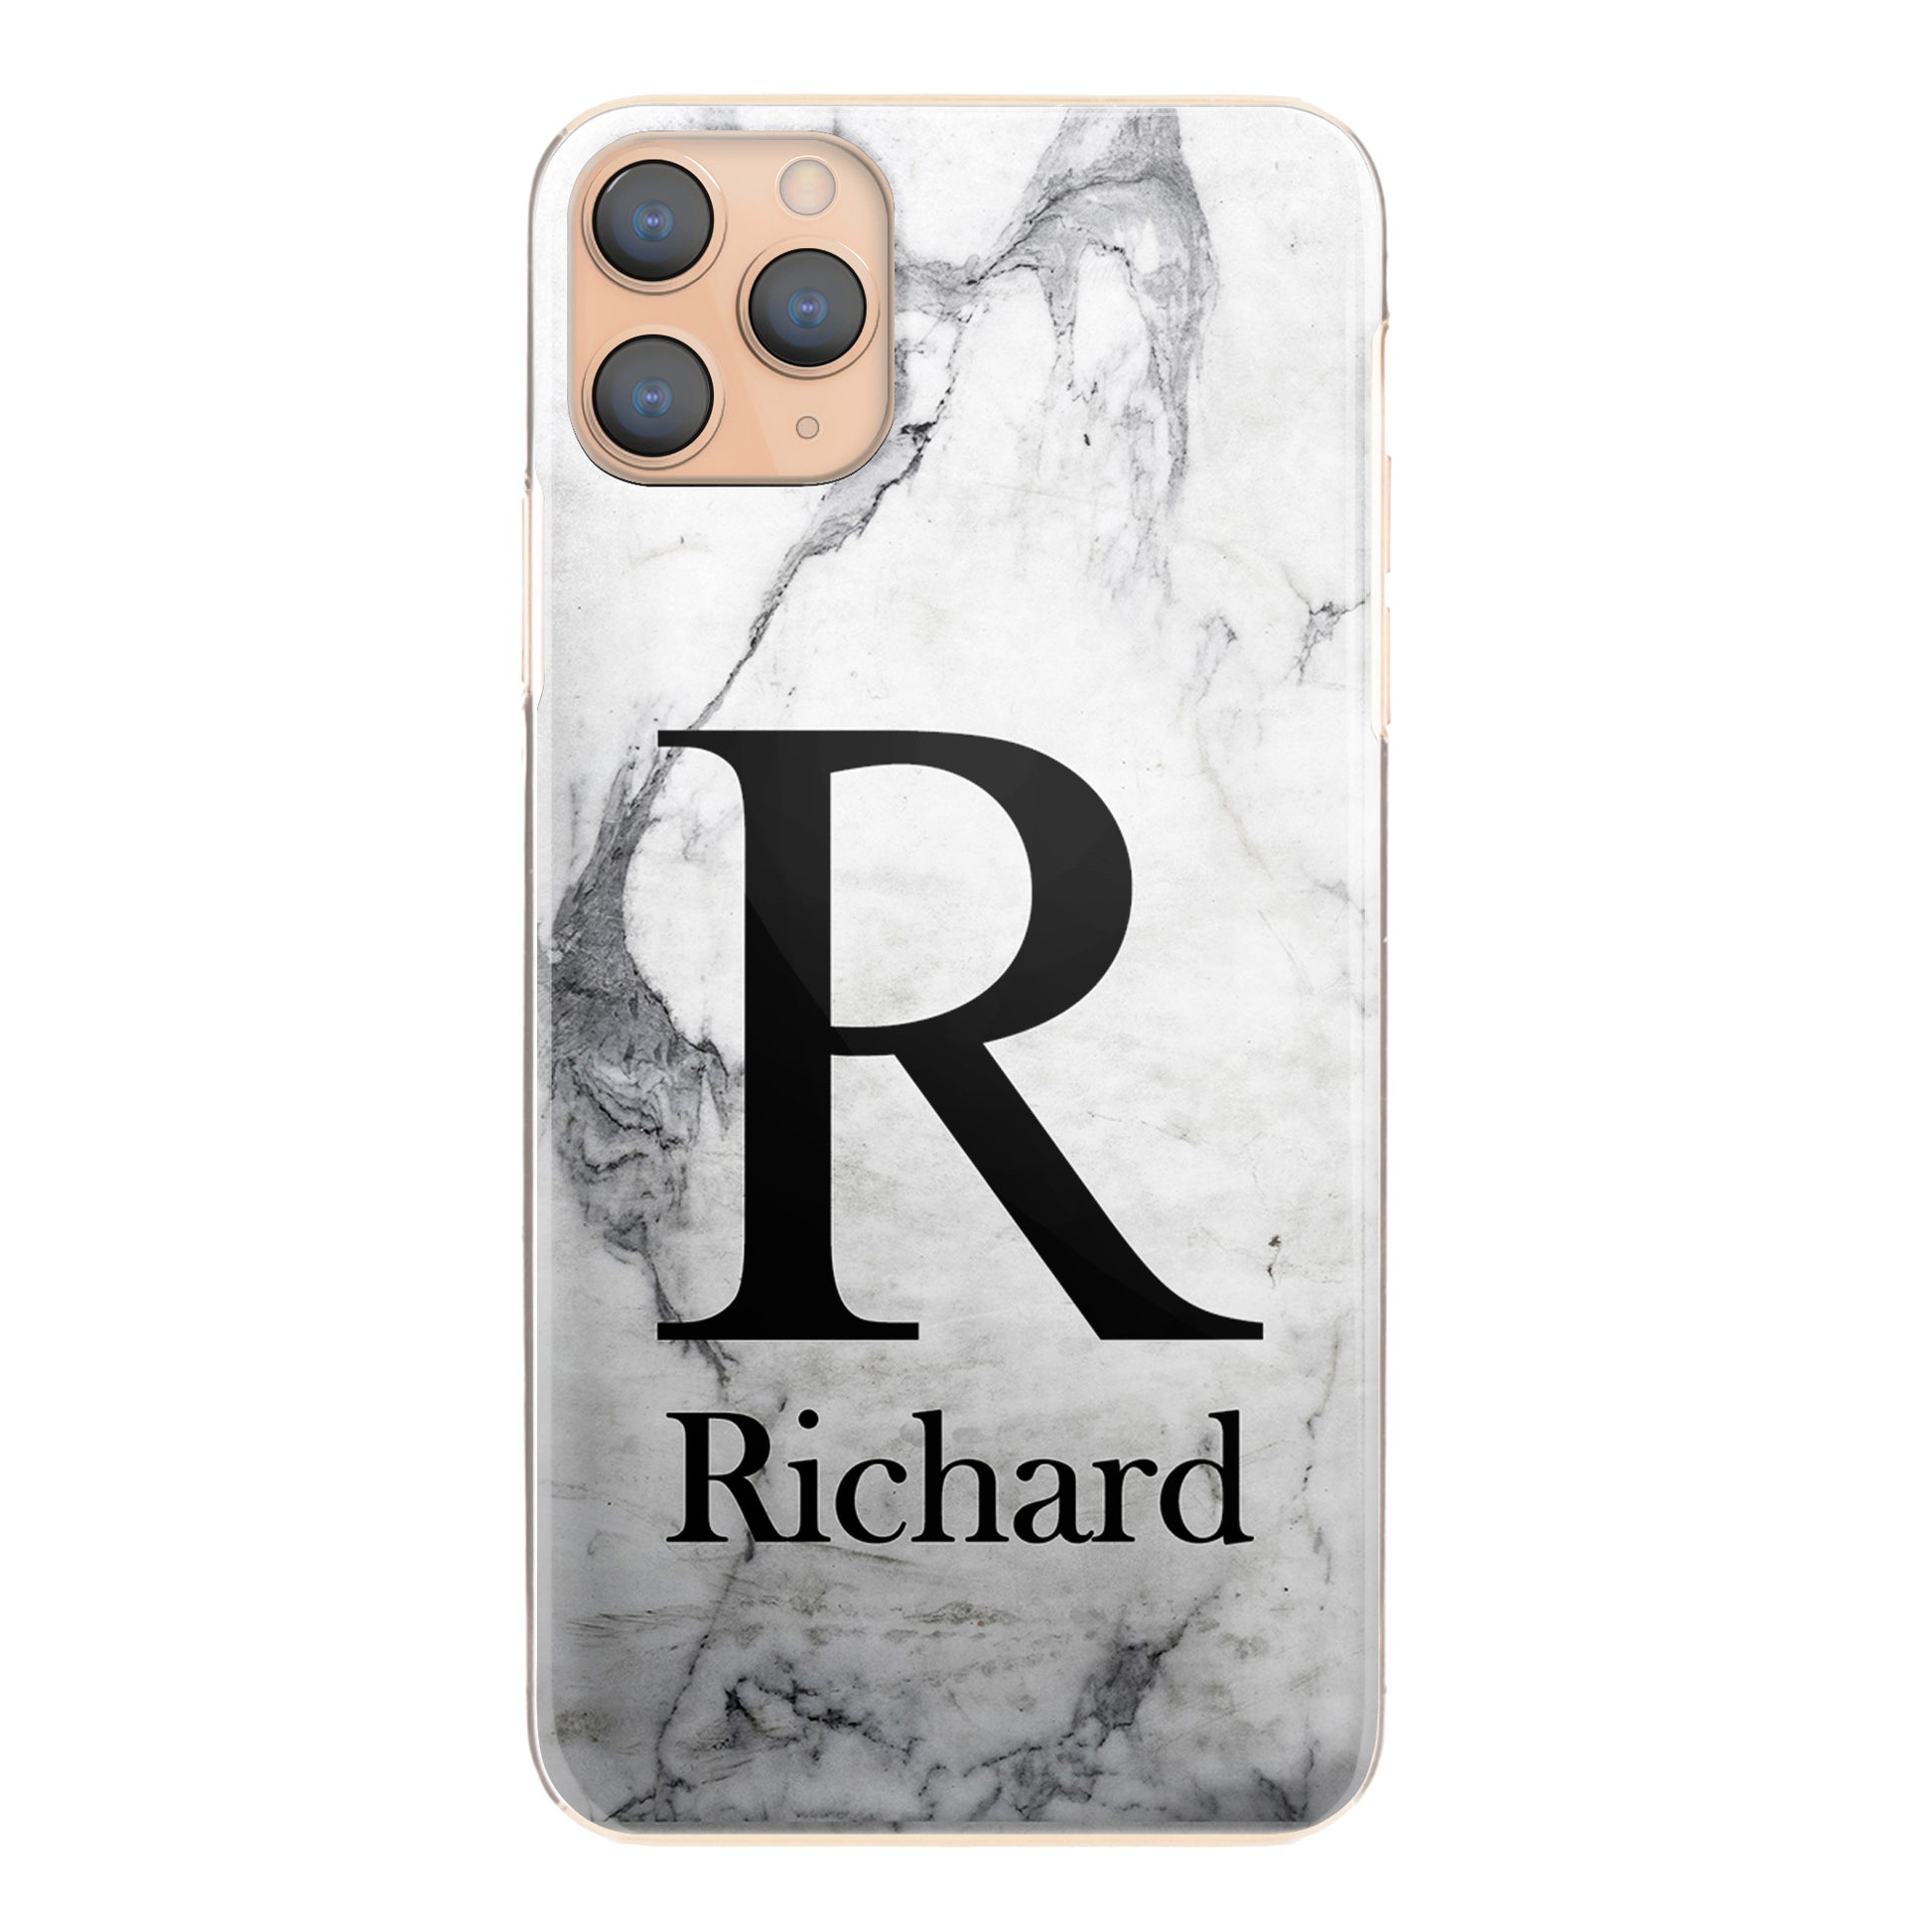 Personalised Apple iPhone Hard Case with Traditional Monogram and Text on Grey Marble